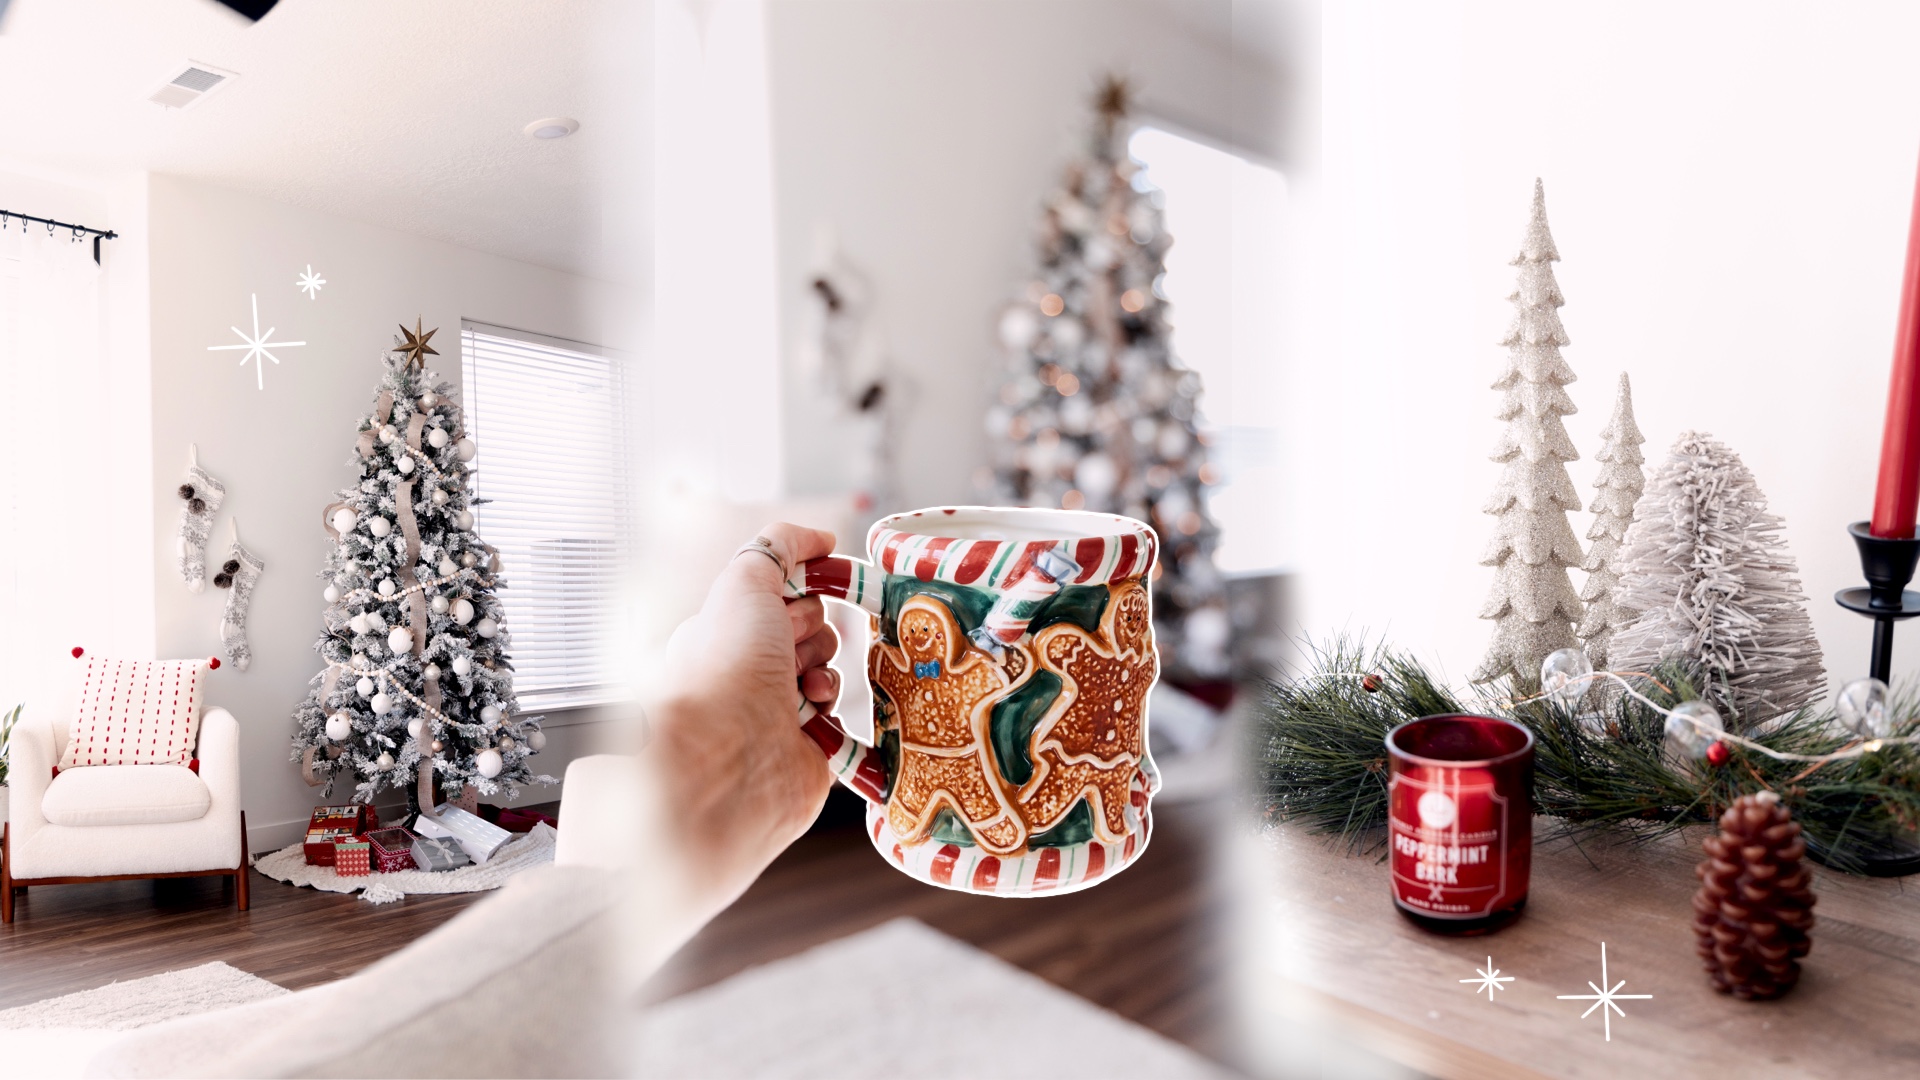 Christmas Decorating? These Ideas for Christmas Home Decor will warm your heart and get you jolly-filled with holiday spirit and cheer!